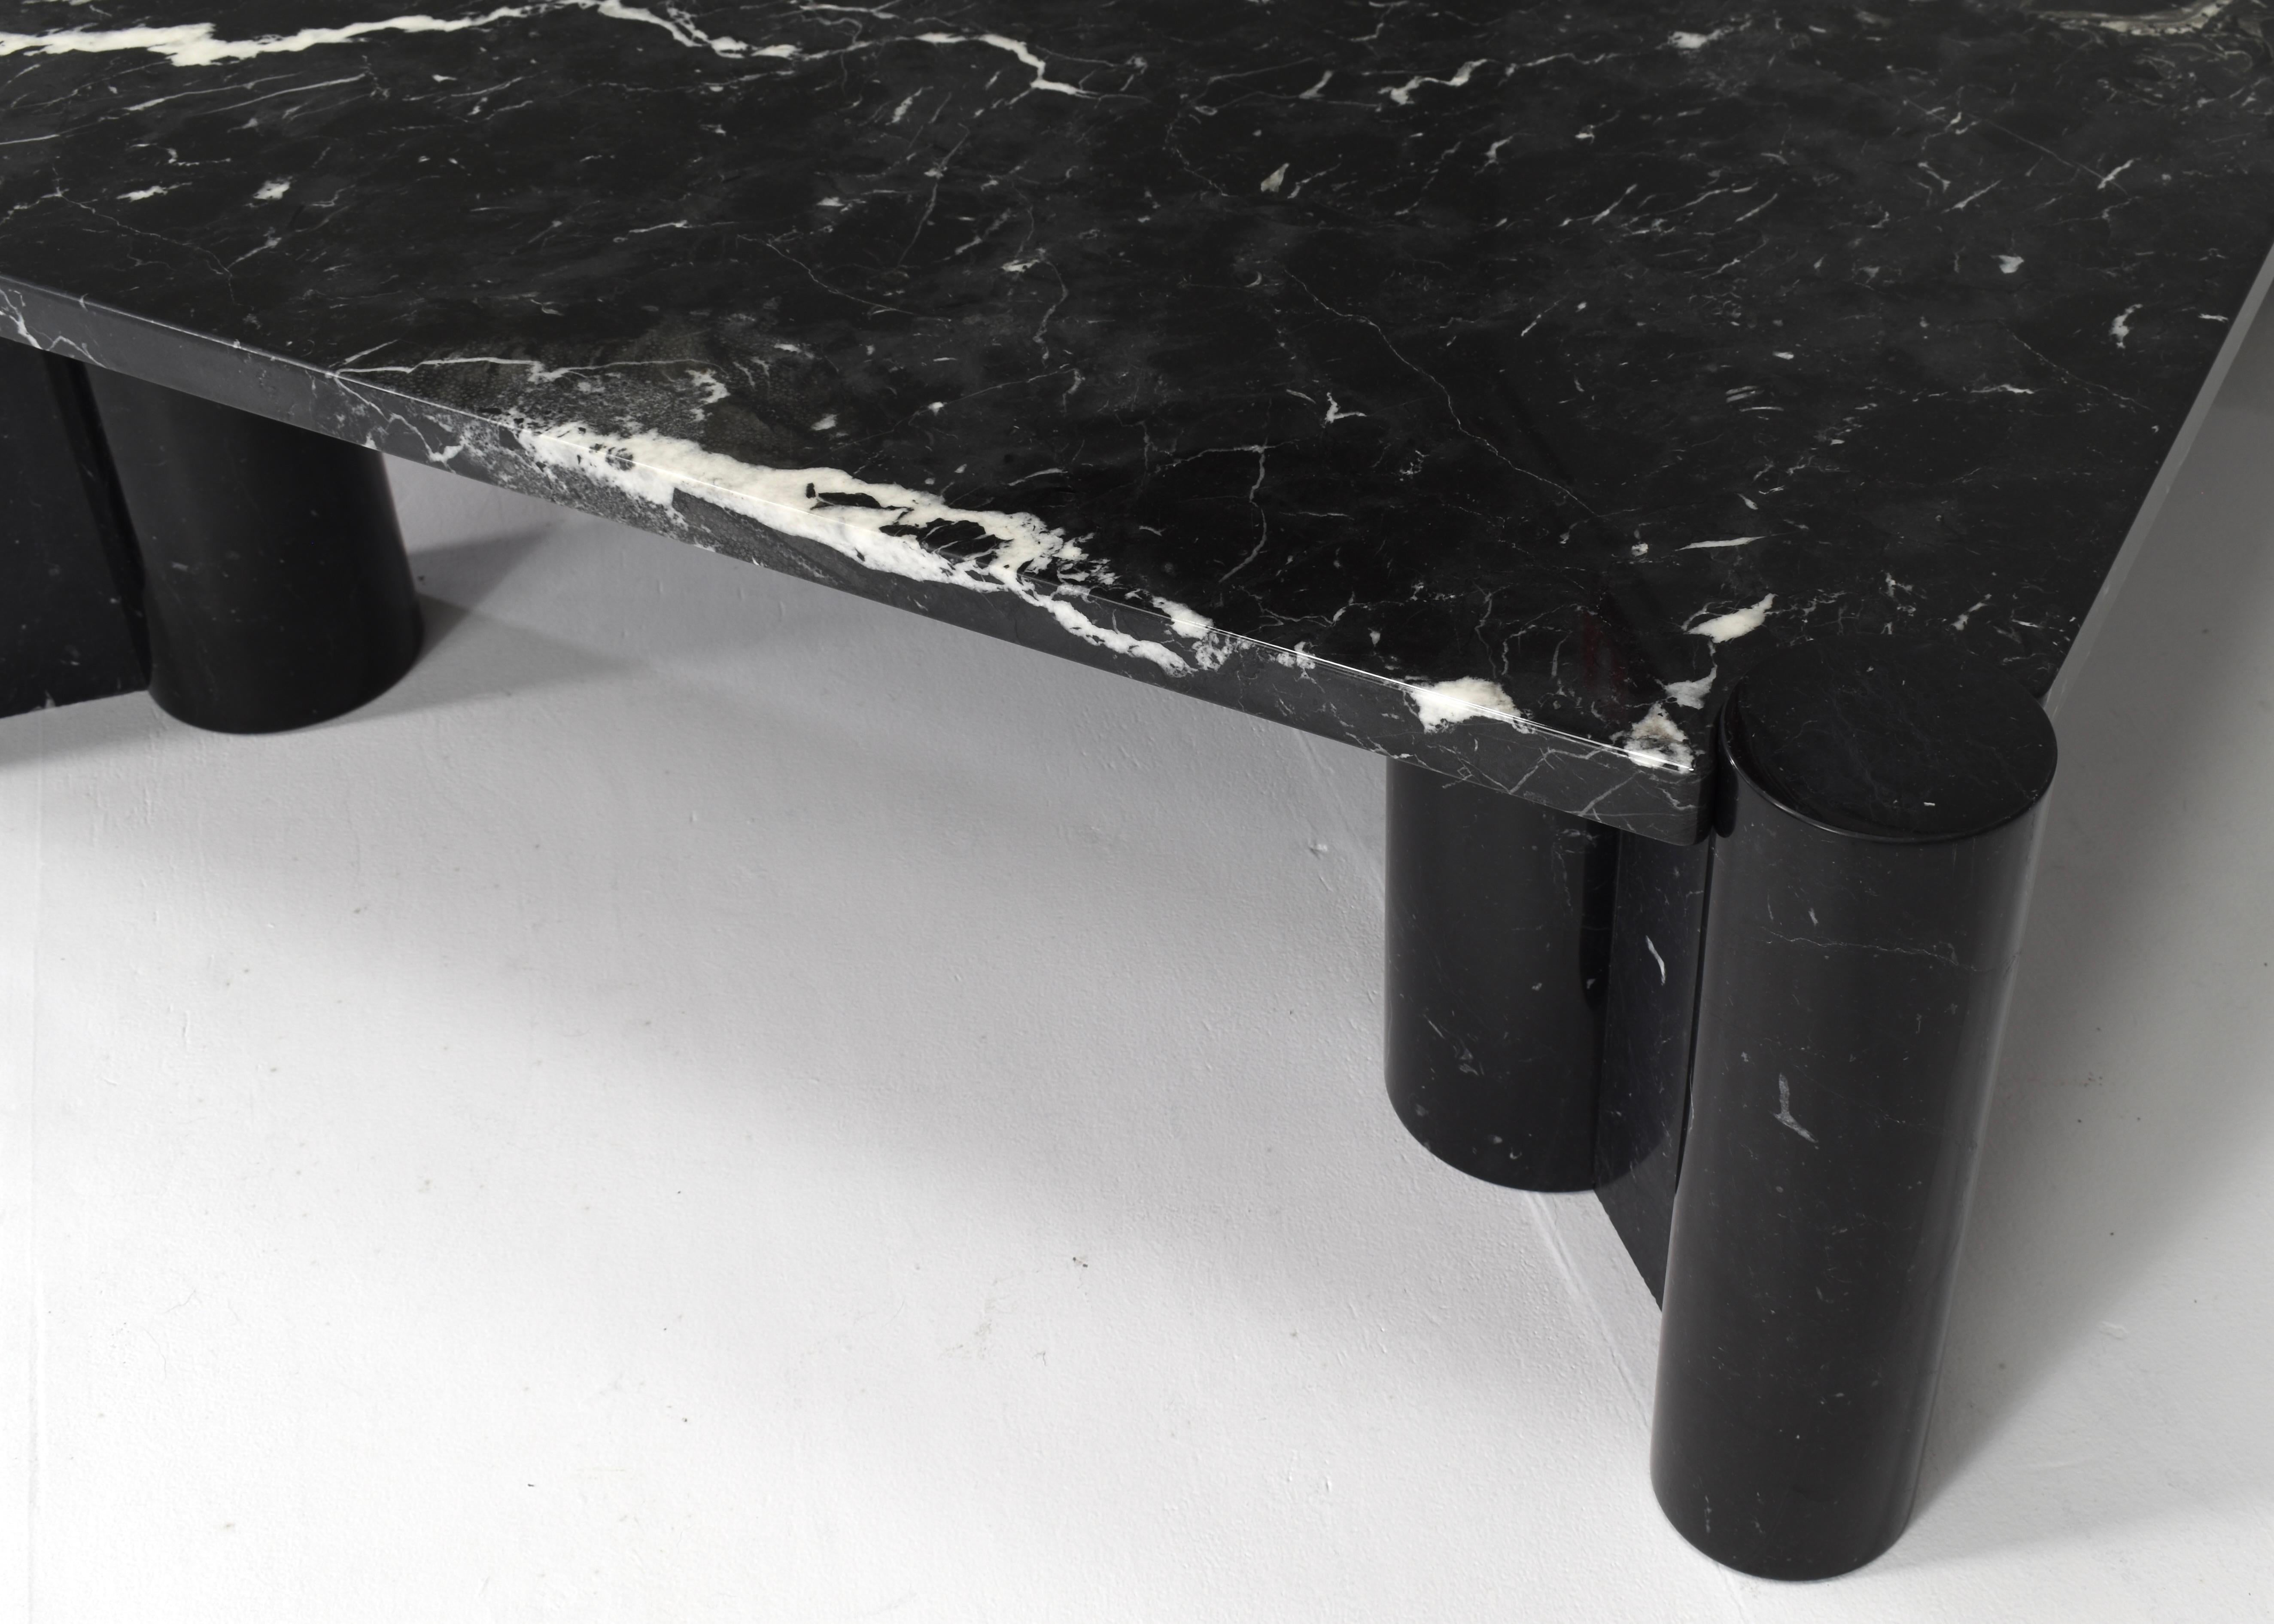 Gae Aulenti for Knoll ‘Jumbo’ Coffee Table in Nero Marquina Black Marble, Italy  3